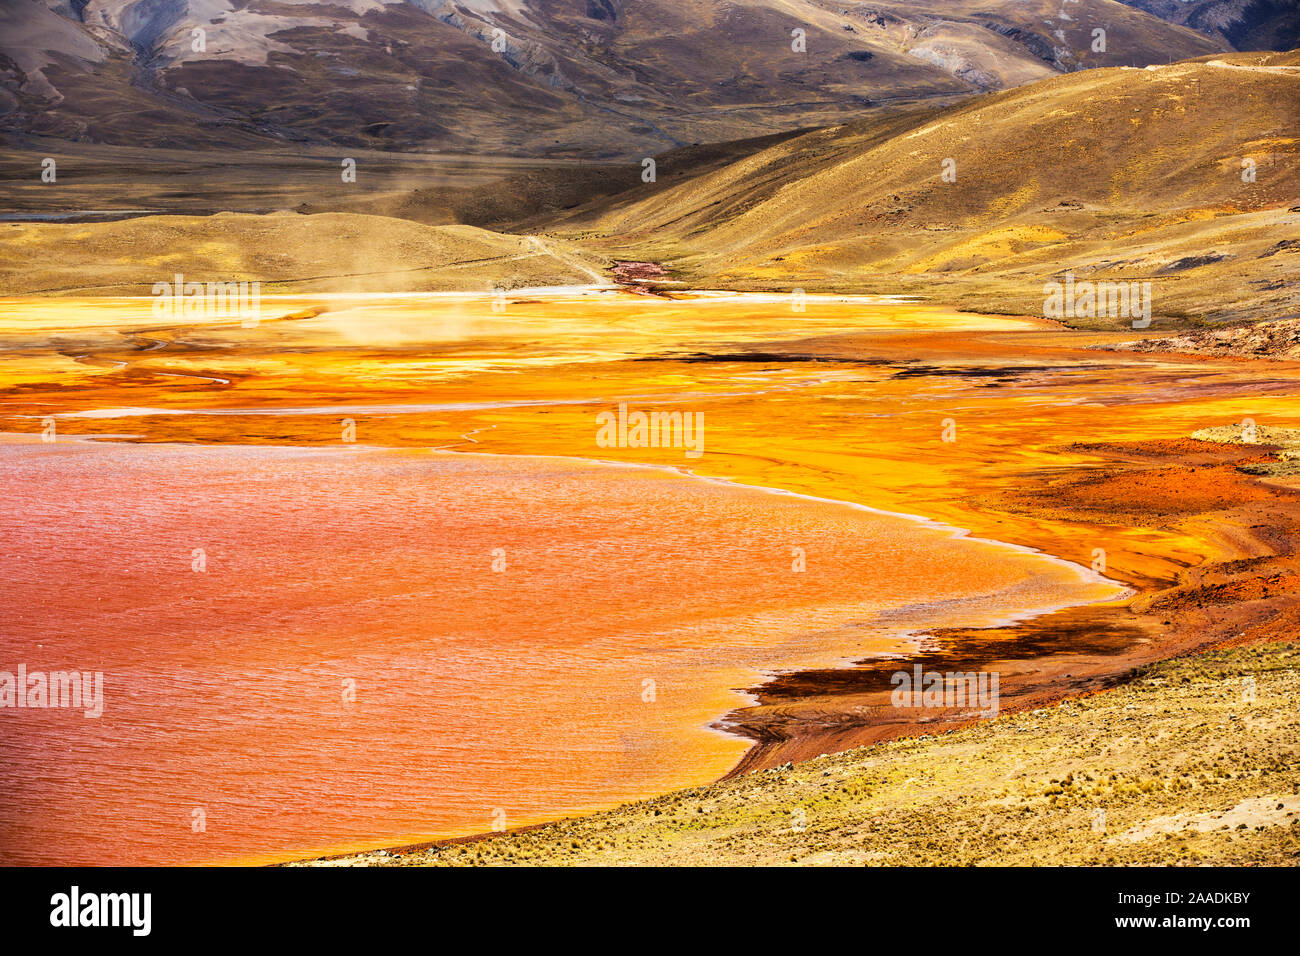 Laguna Miluni a reservoir fed by glacial melt water from the Andean peak of Huayna Potosi. As climate change causes the glaciers to melt, the water supply for La Paz, Bolivia's capital city is rapidly running dry.  Andes, Bolivia. October 2015. Stock Photo